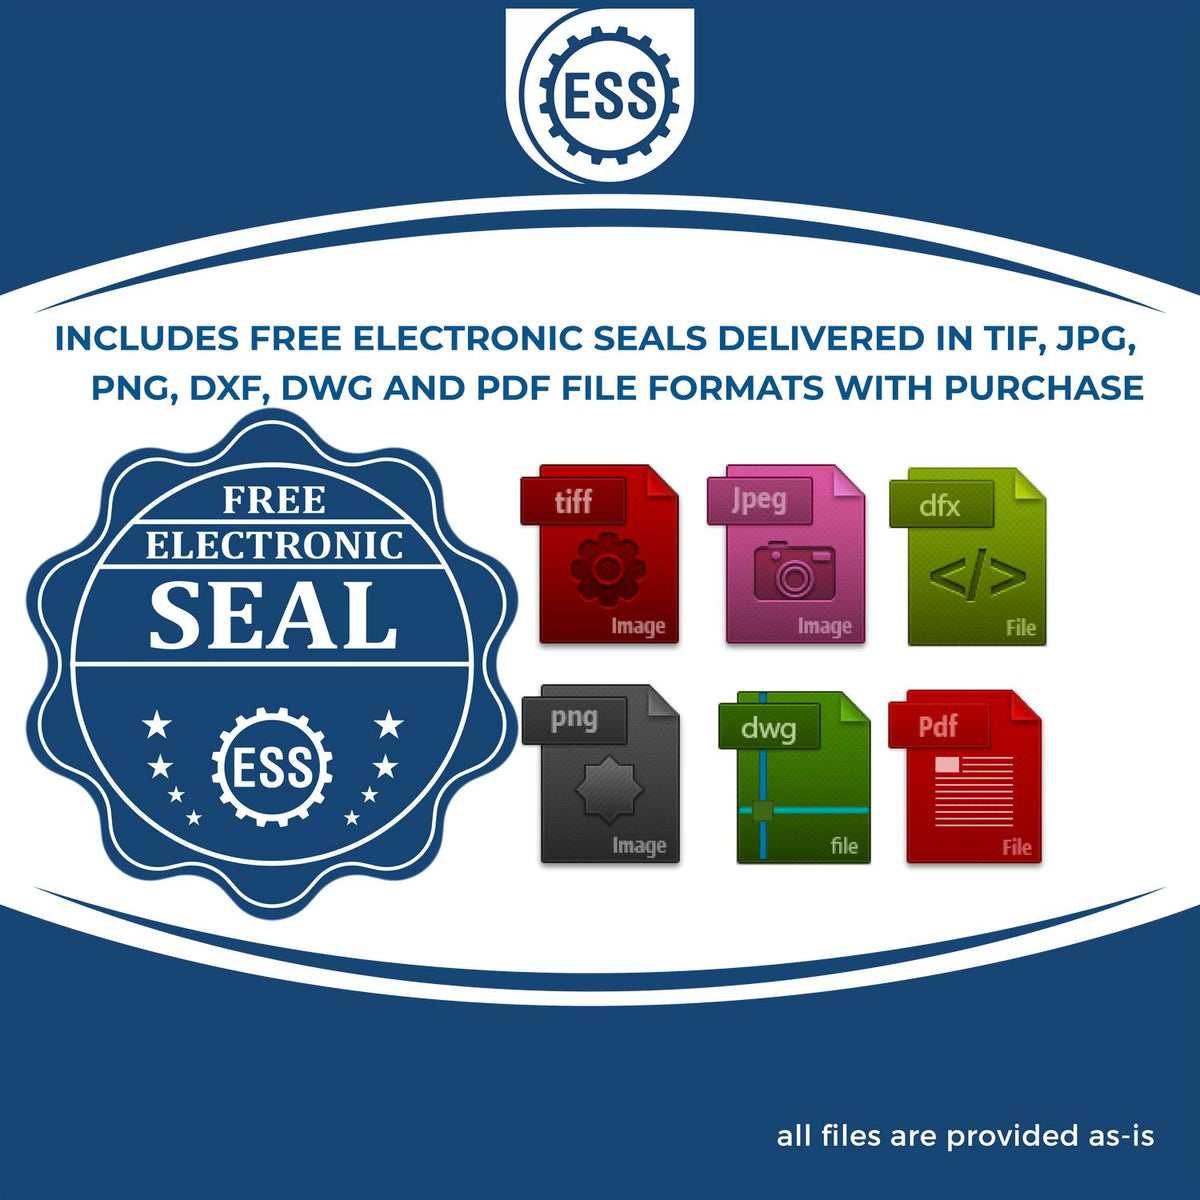 An infographic for the free electronic seal for the MaxLight Premium Pre-Inked Utah State Seal Notarial Stamp illustrating the different file type icons such as DXF, DWG, TIF, JPG and PNG.